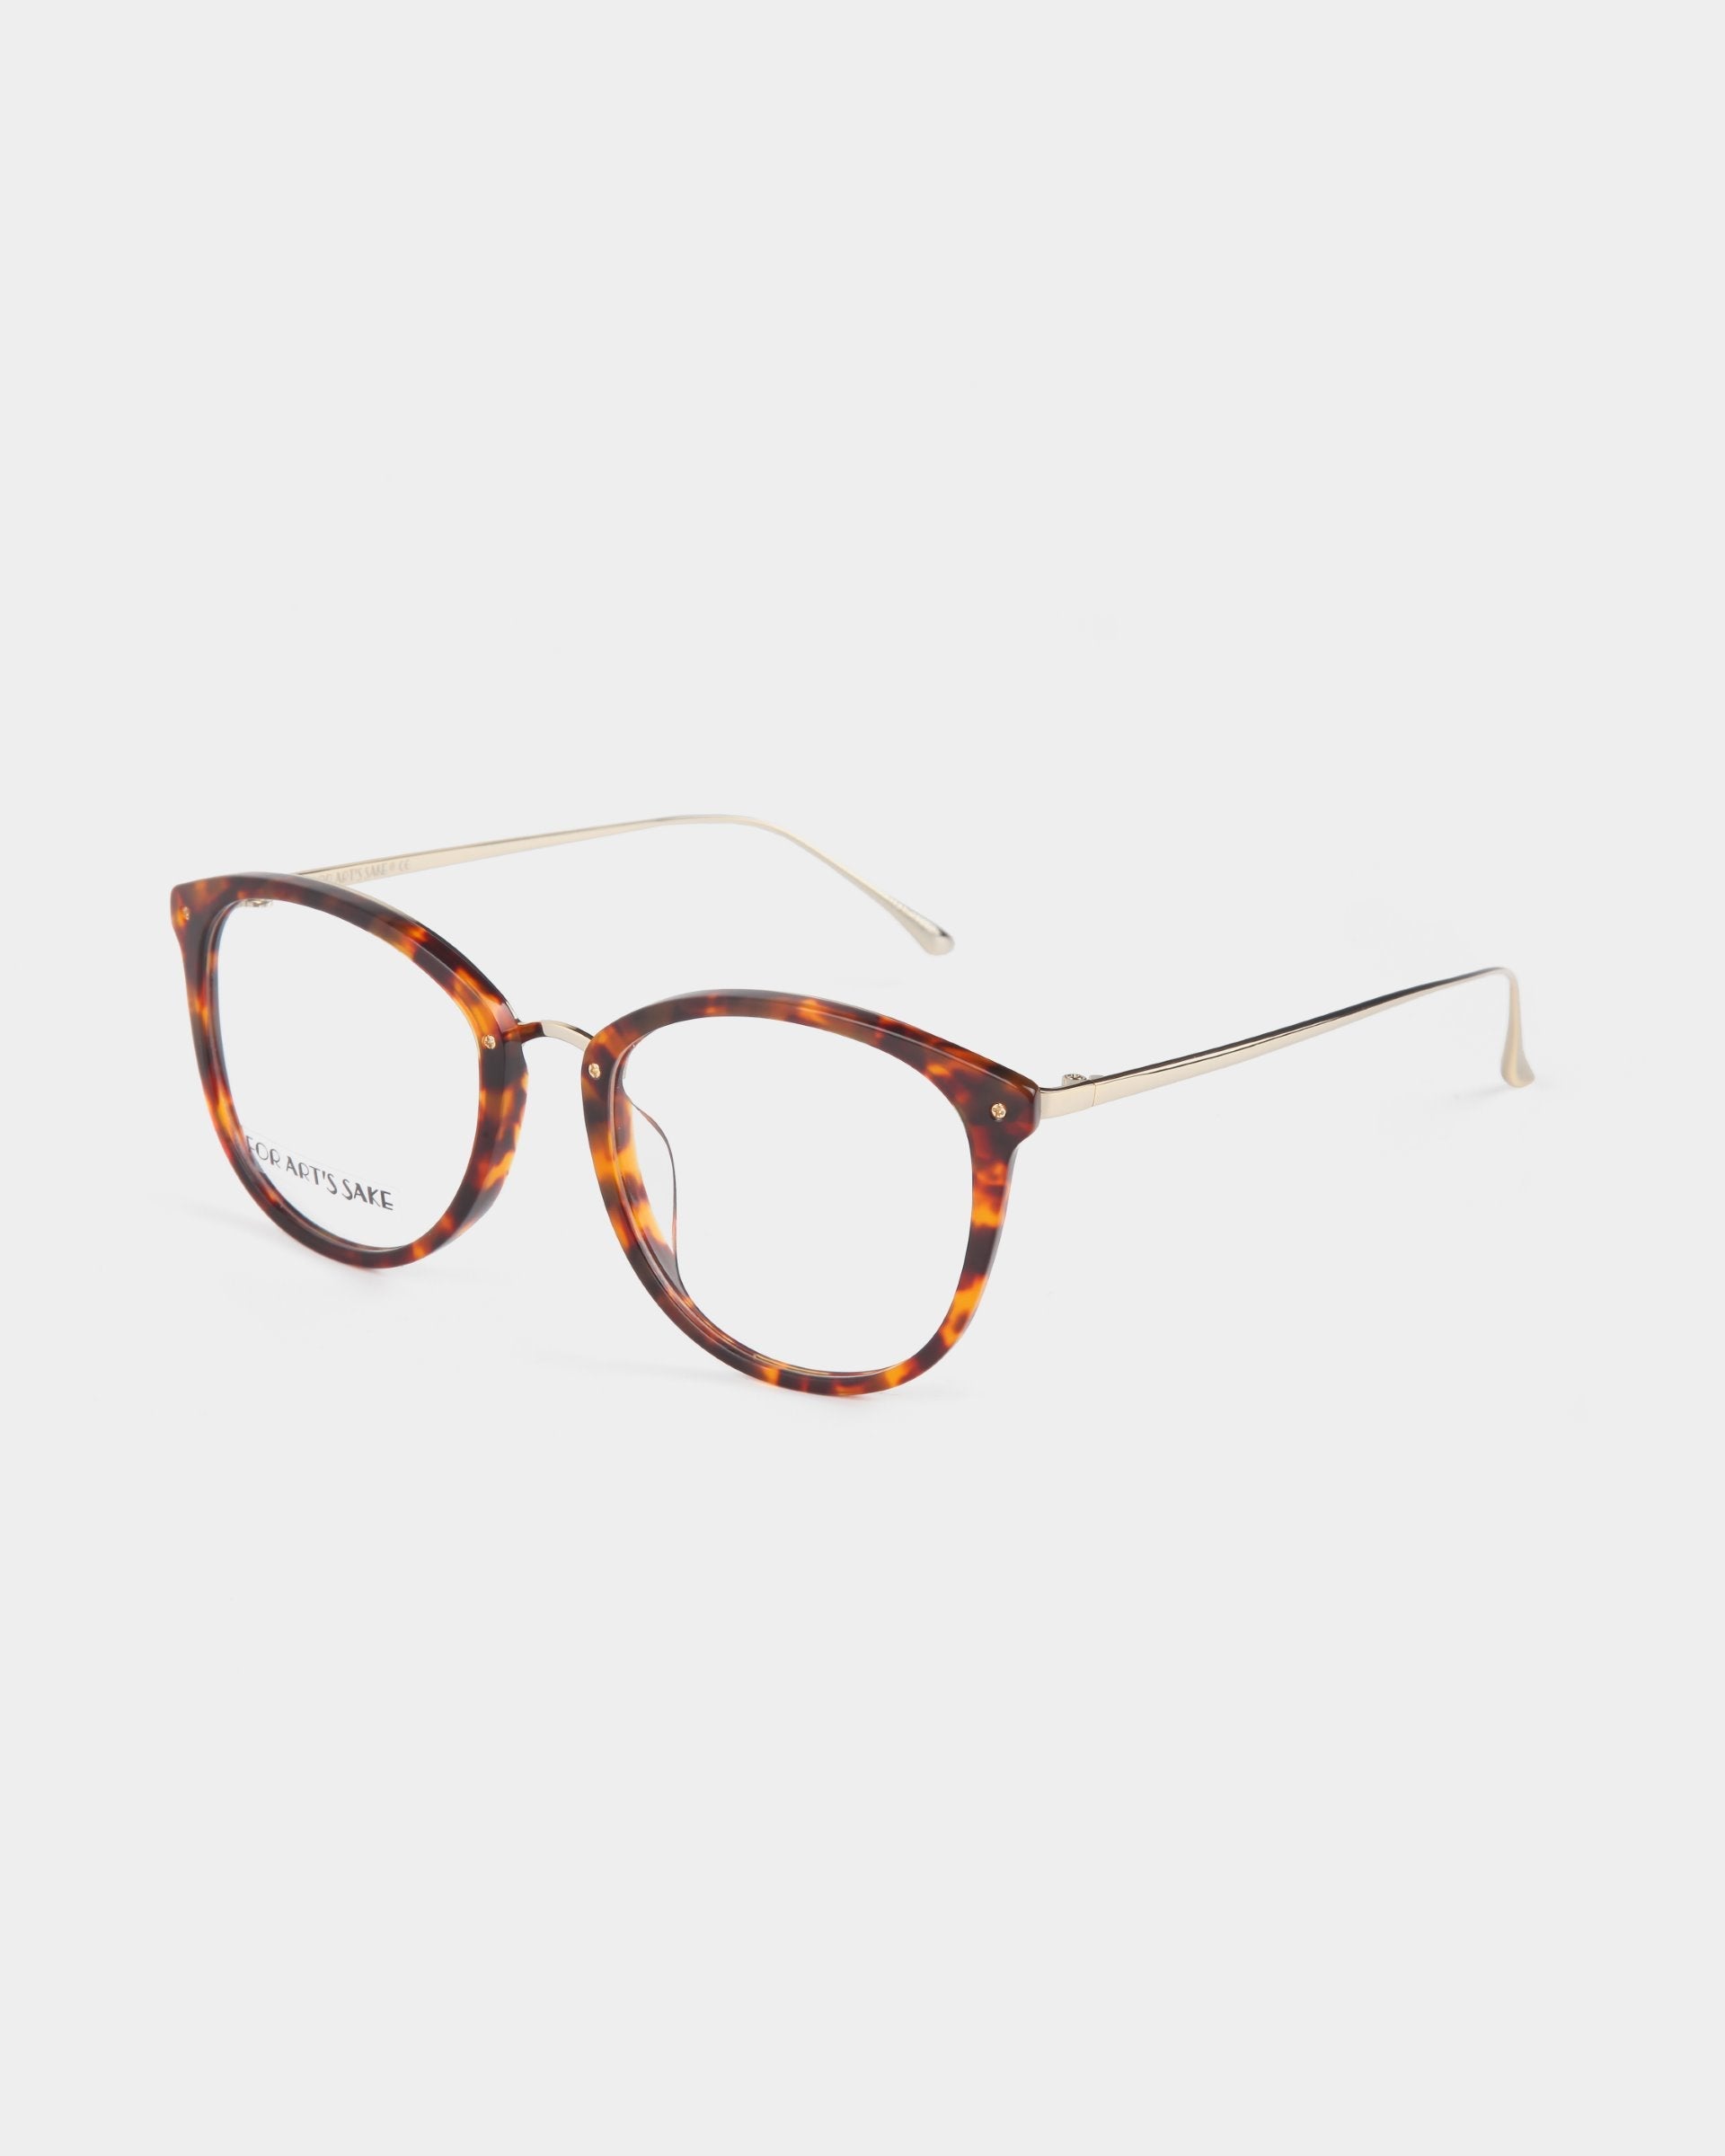 A pair of Club Brown glasses by For Art&#39;s Sake® with a tortoiseshell-pattern and a rounded cat-eye shape. The lenses are clear, featuring an optional blue light filter, and the thin gold temples and nose pads provide a lightweight and elegant design. Offered with a prescription service, these opticals are set against a plain white background.